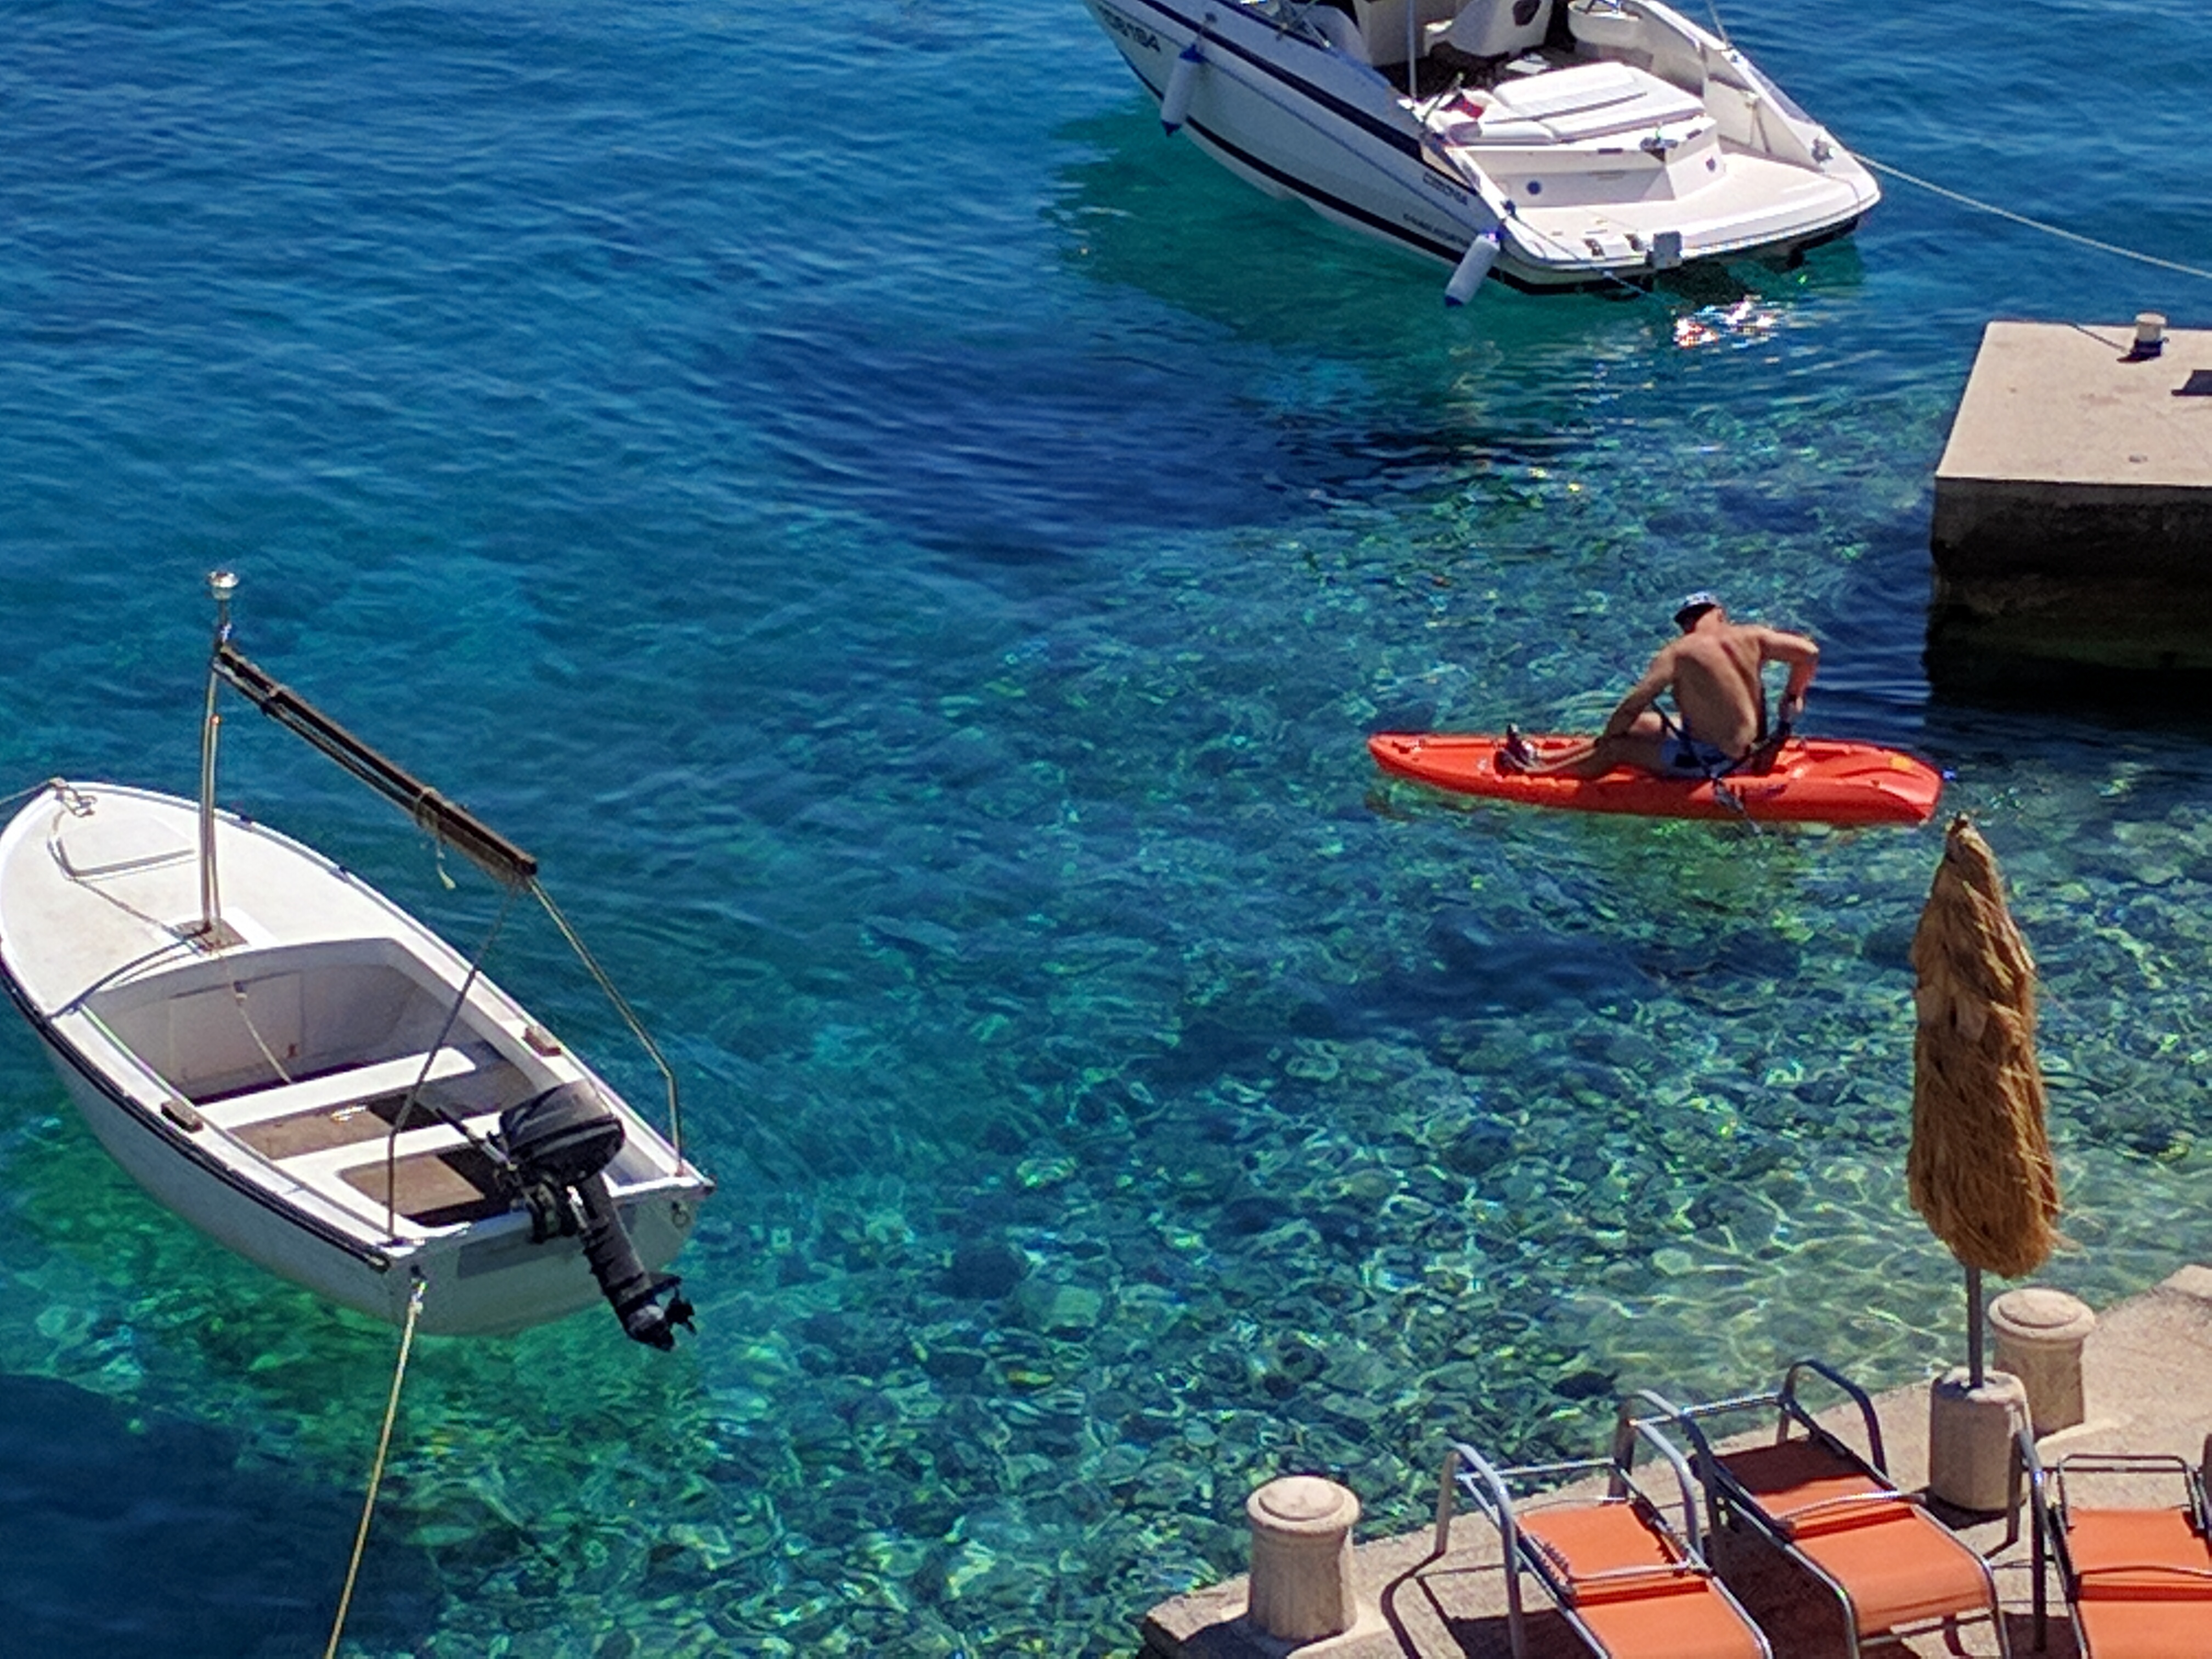 villa ivana kayaks available for guests